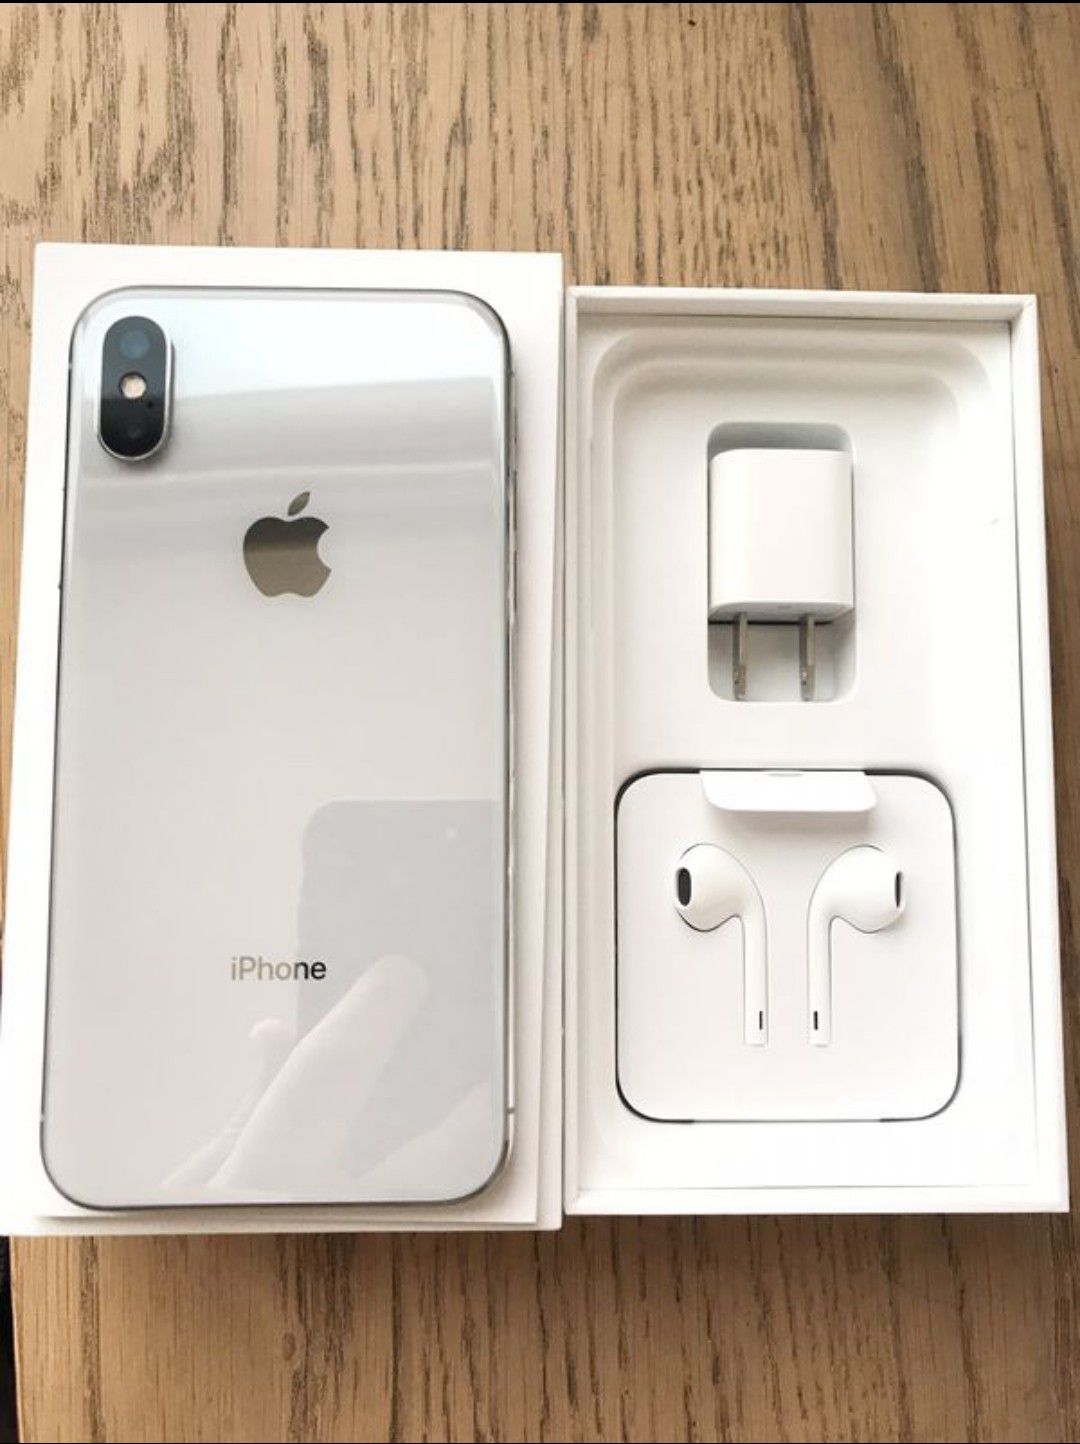 iPhone X - 64GB, Factory Unlocked for AT&T, T-Mobile, Metro PCS, Sprint, Cricket, Lyca, Ultra, International + warranty